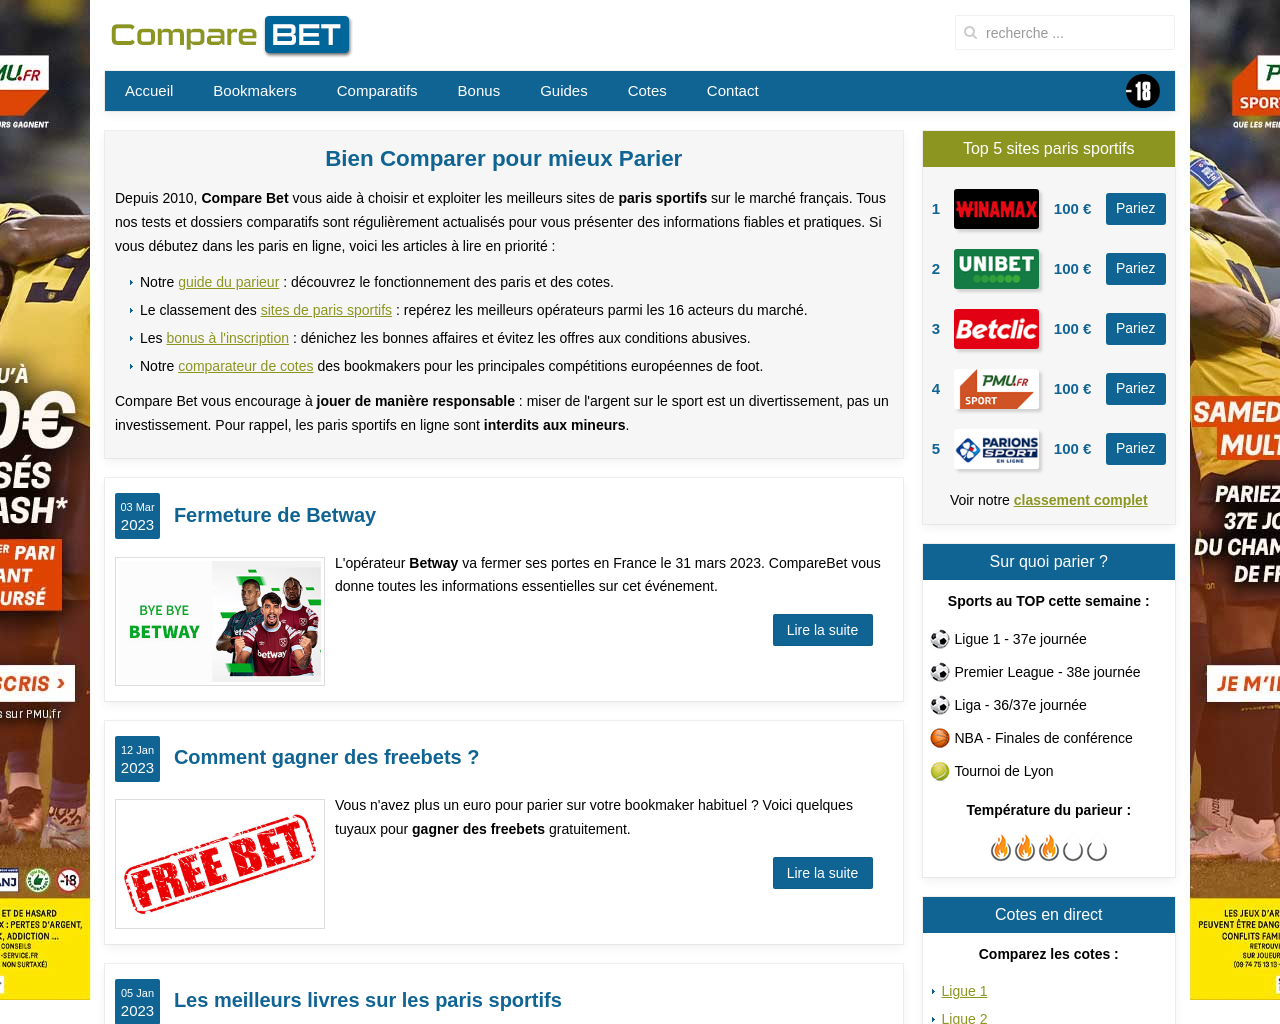 www.compare-bet.fr